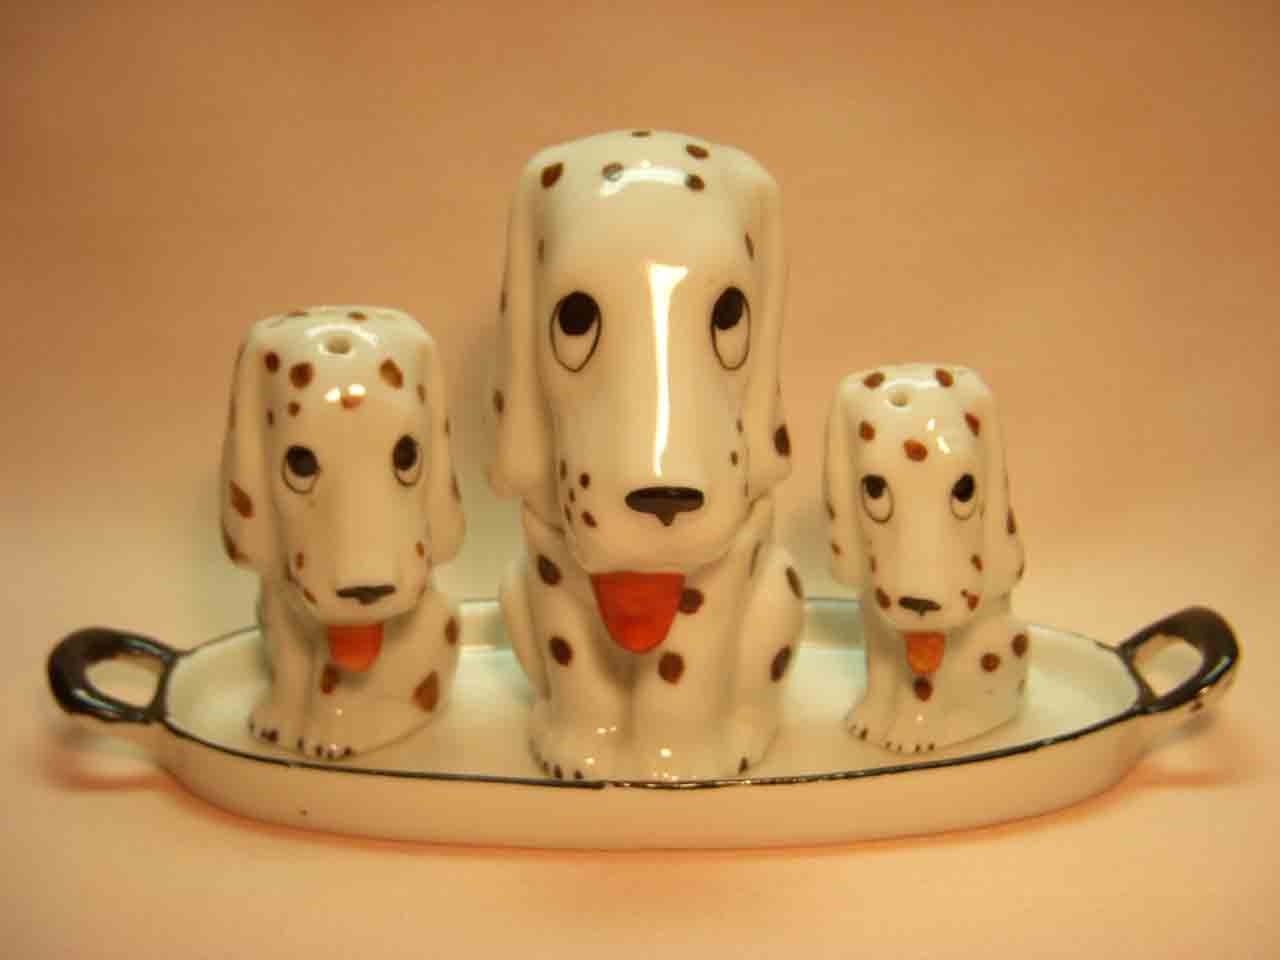 Dismal Desmond dogs from Germany salt and pepper shakers